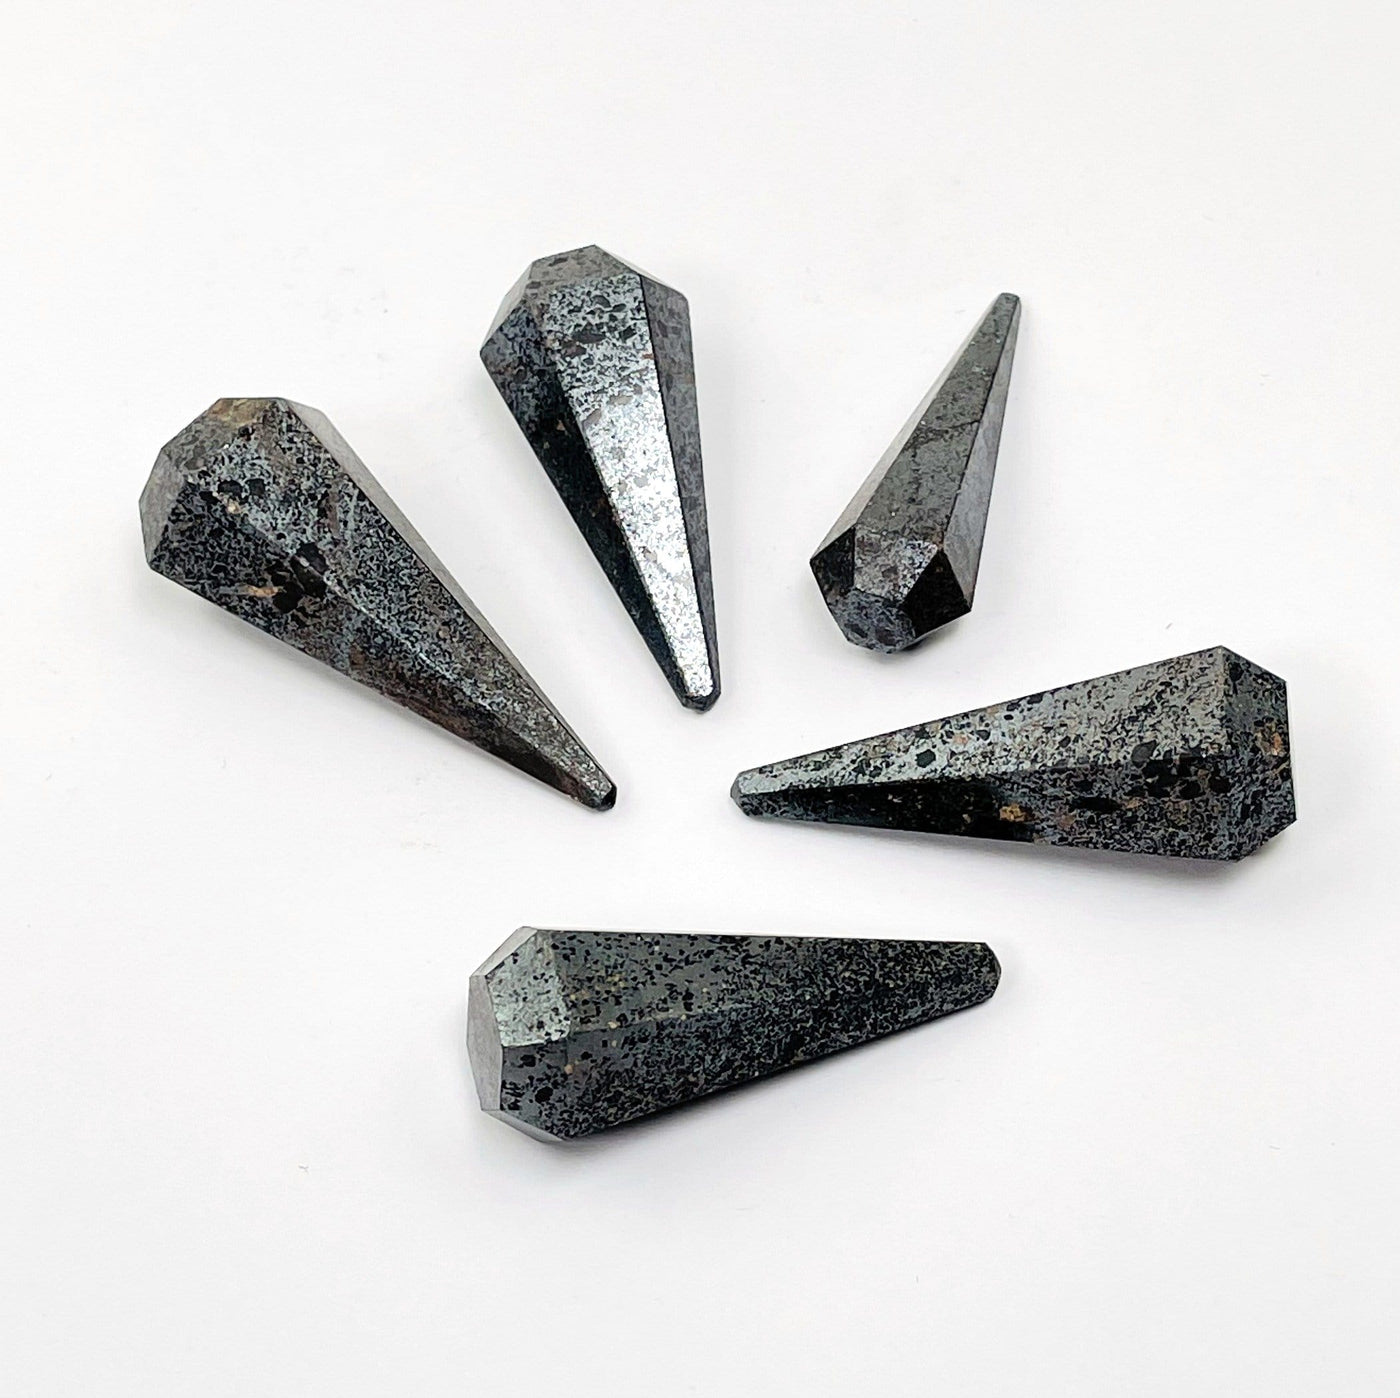 multiple hematite pendulum points placed around each other to show size and design differences